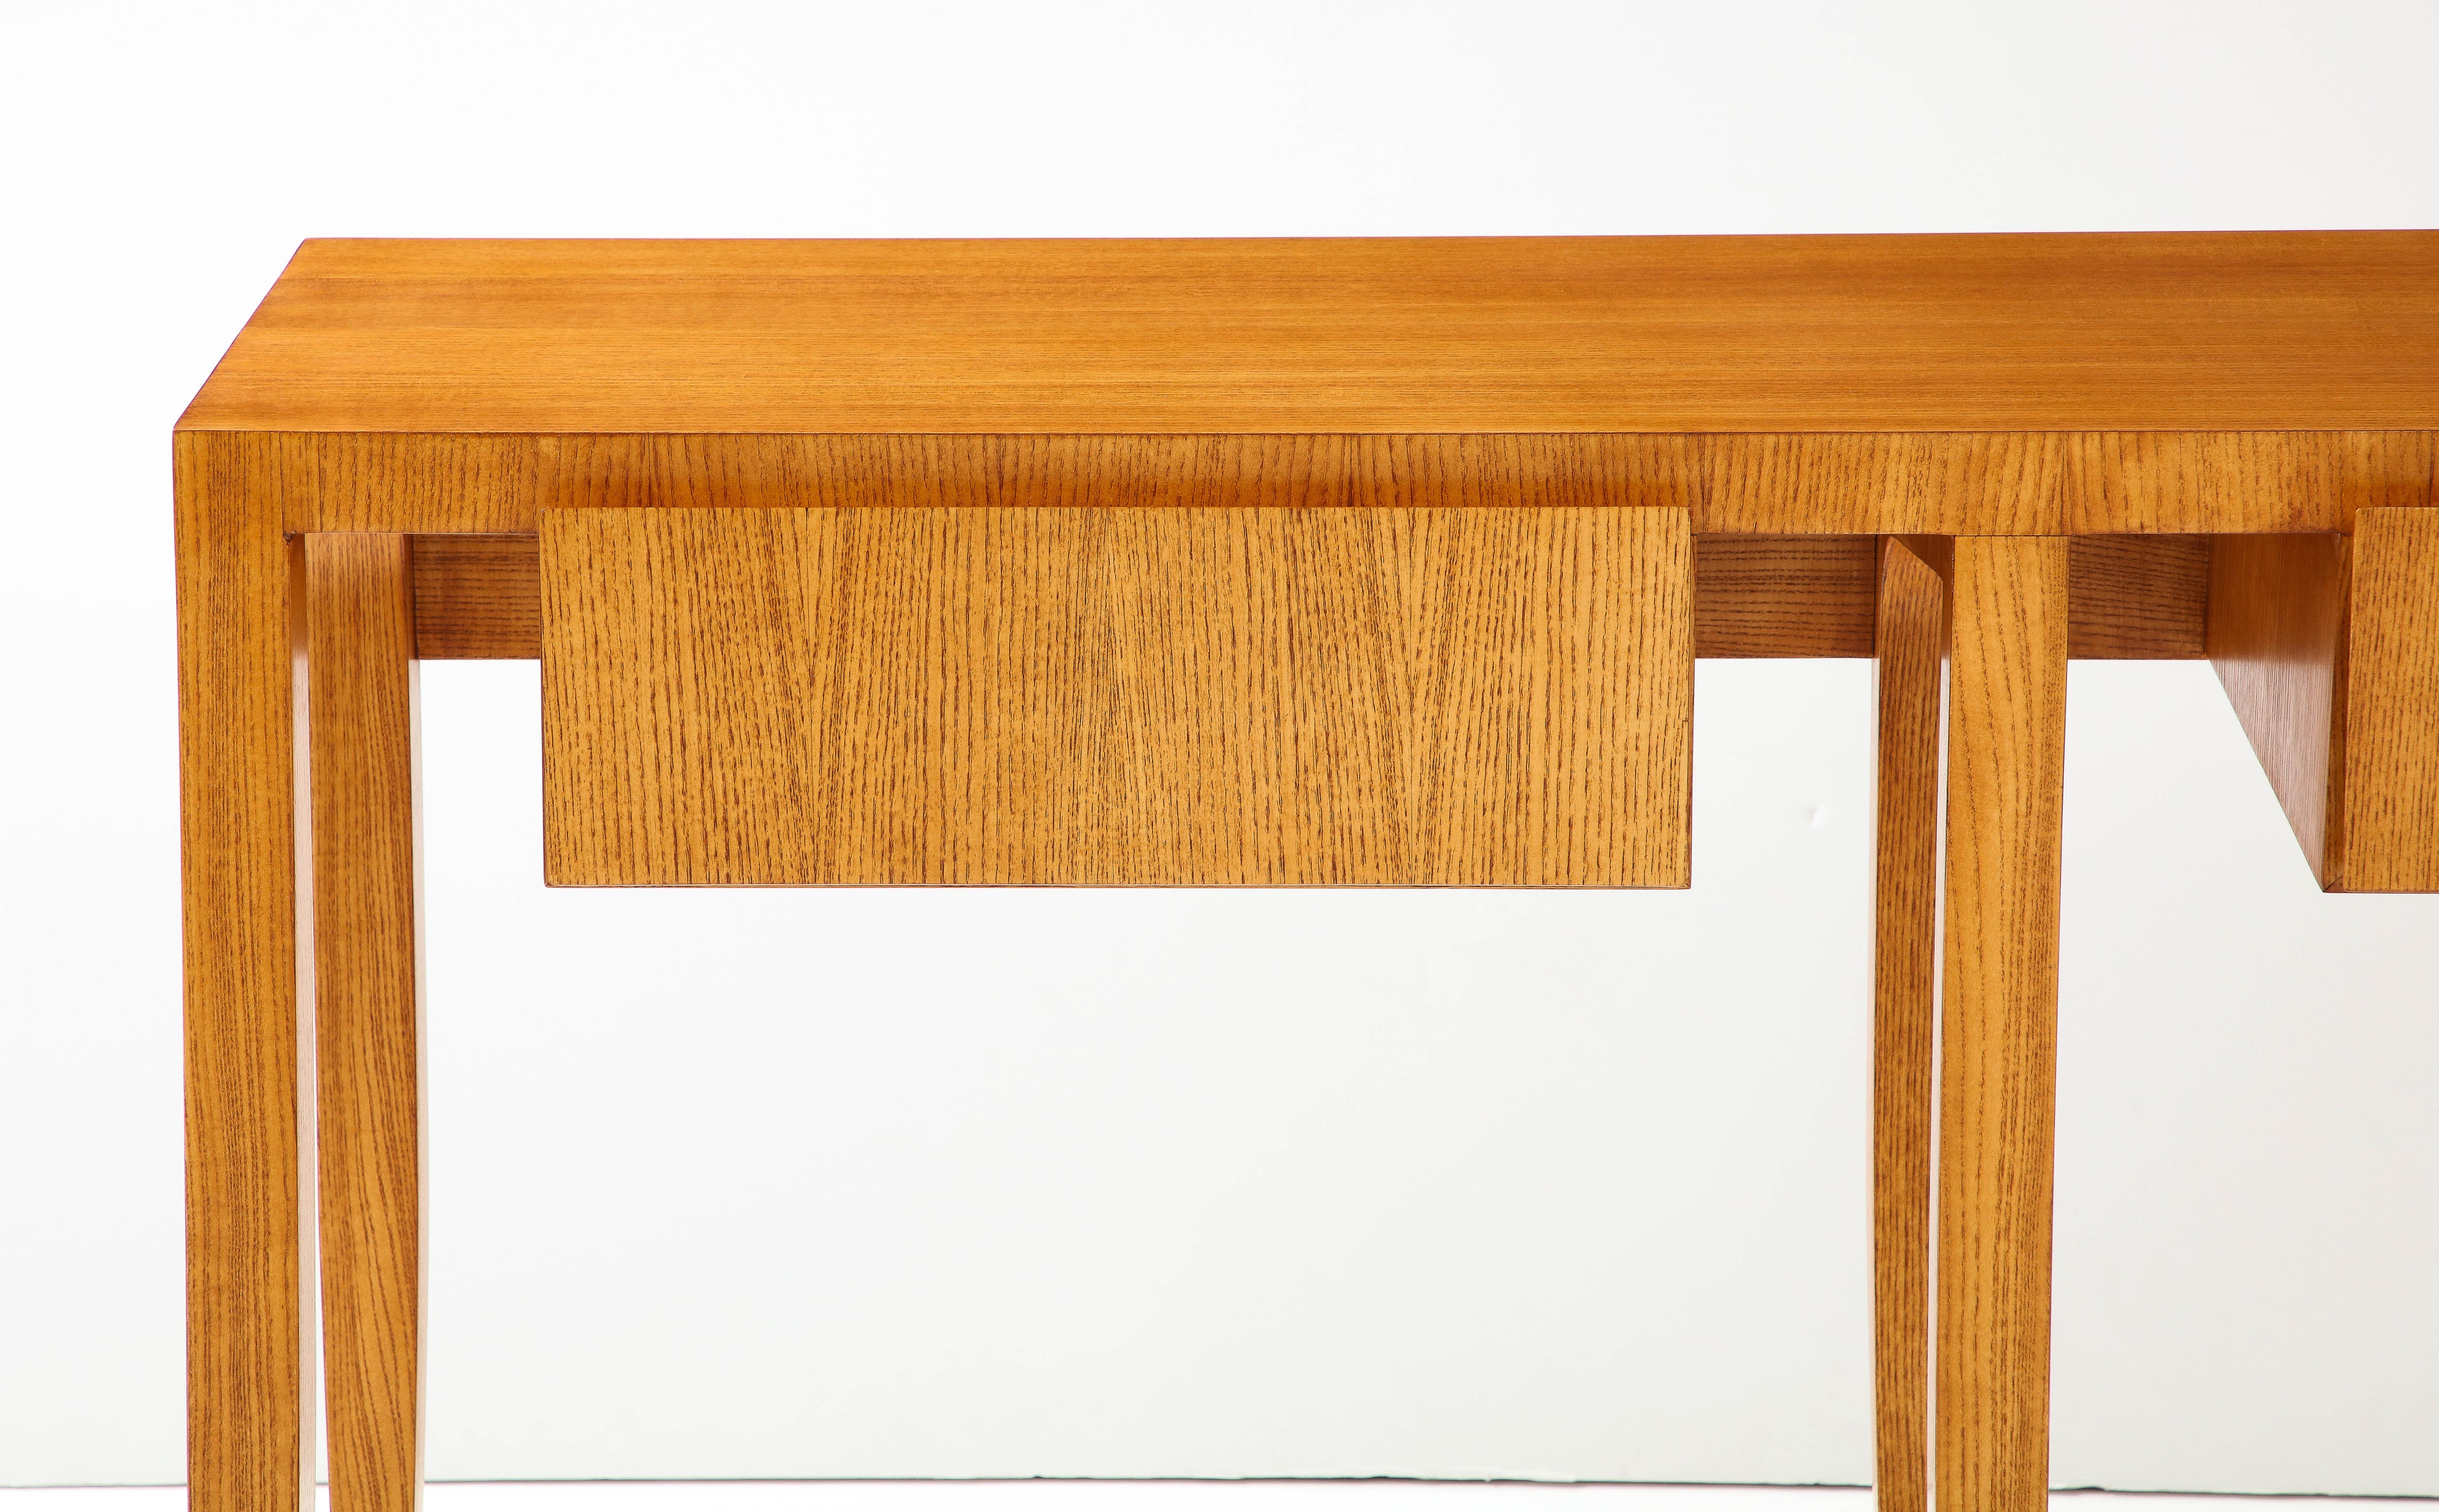 Gio Ponti for Giordano Chiesa Rare Pair of Ash Wood Consoles, Italy, 1950s For Sale 1